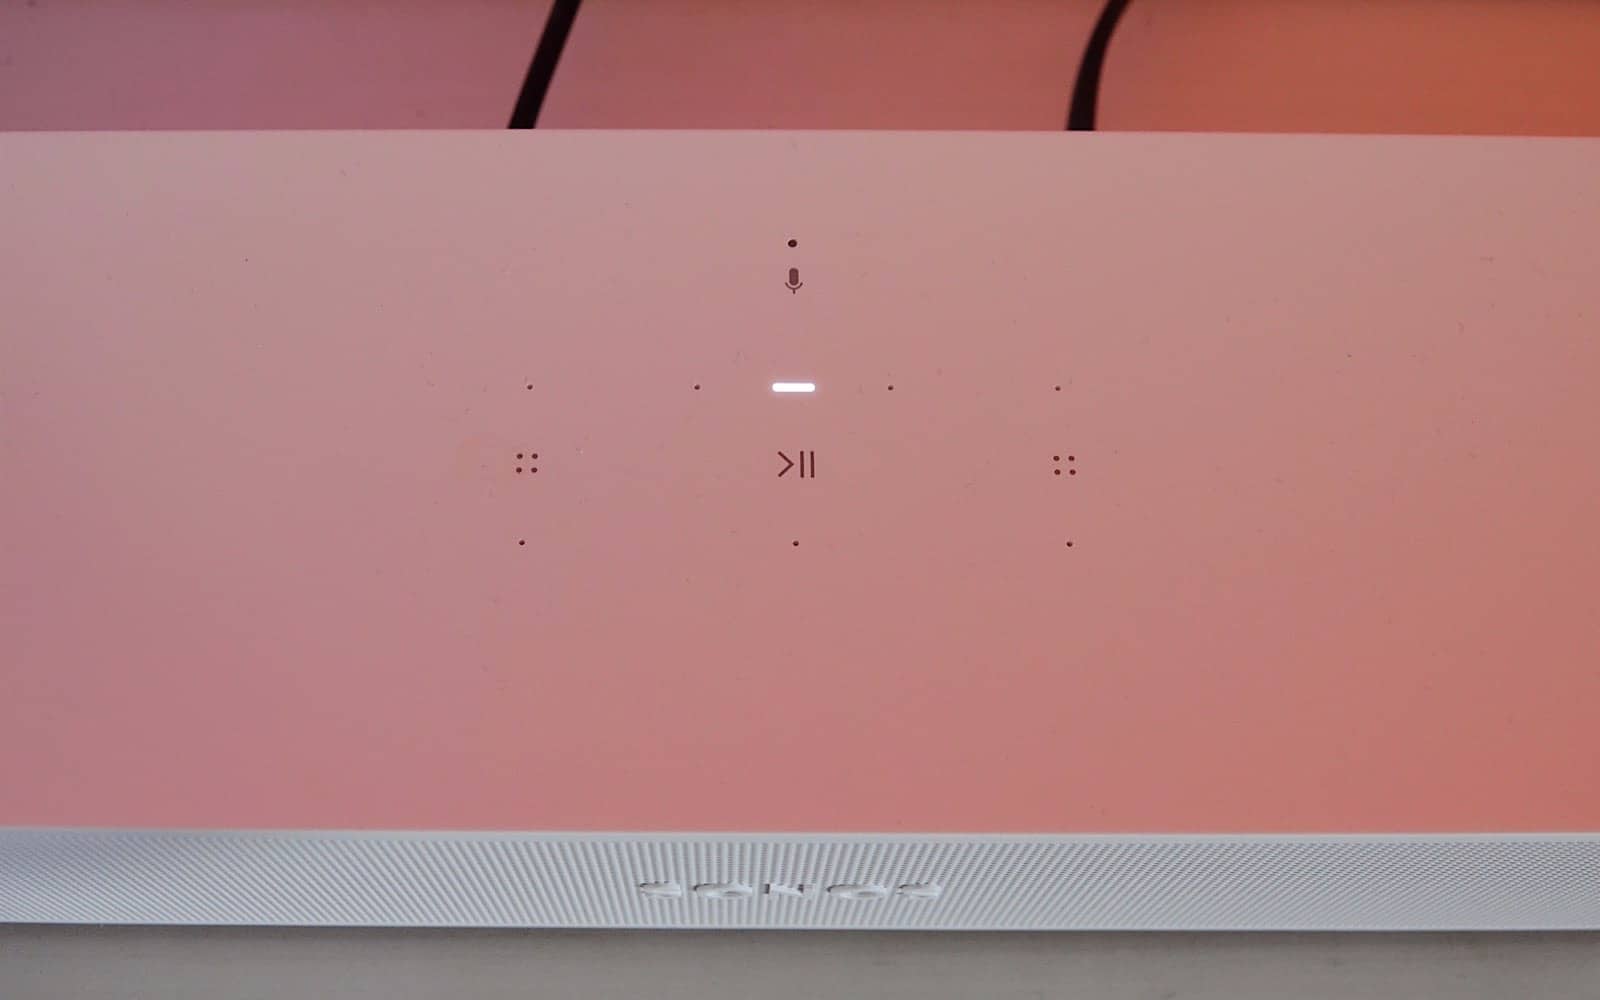 The touch controls of the Sonos Beam Gen 2